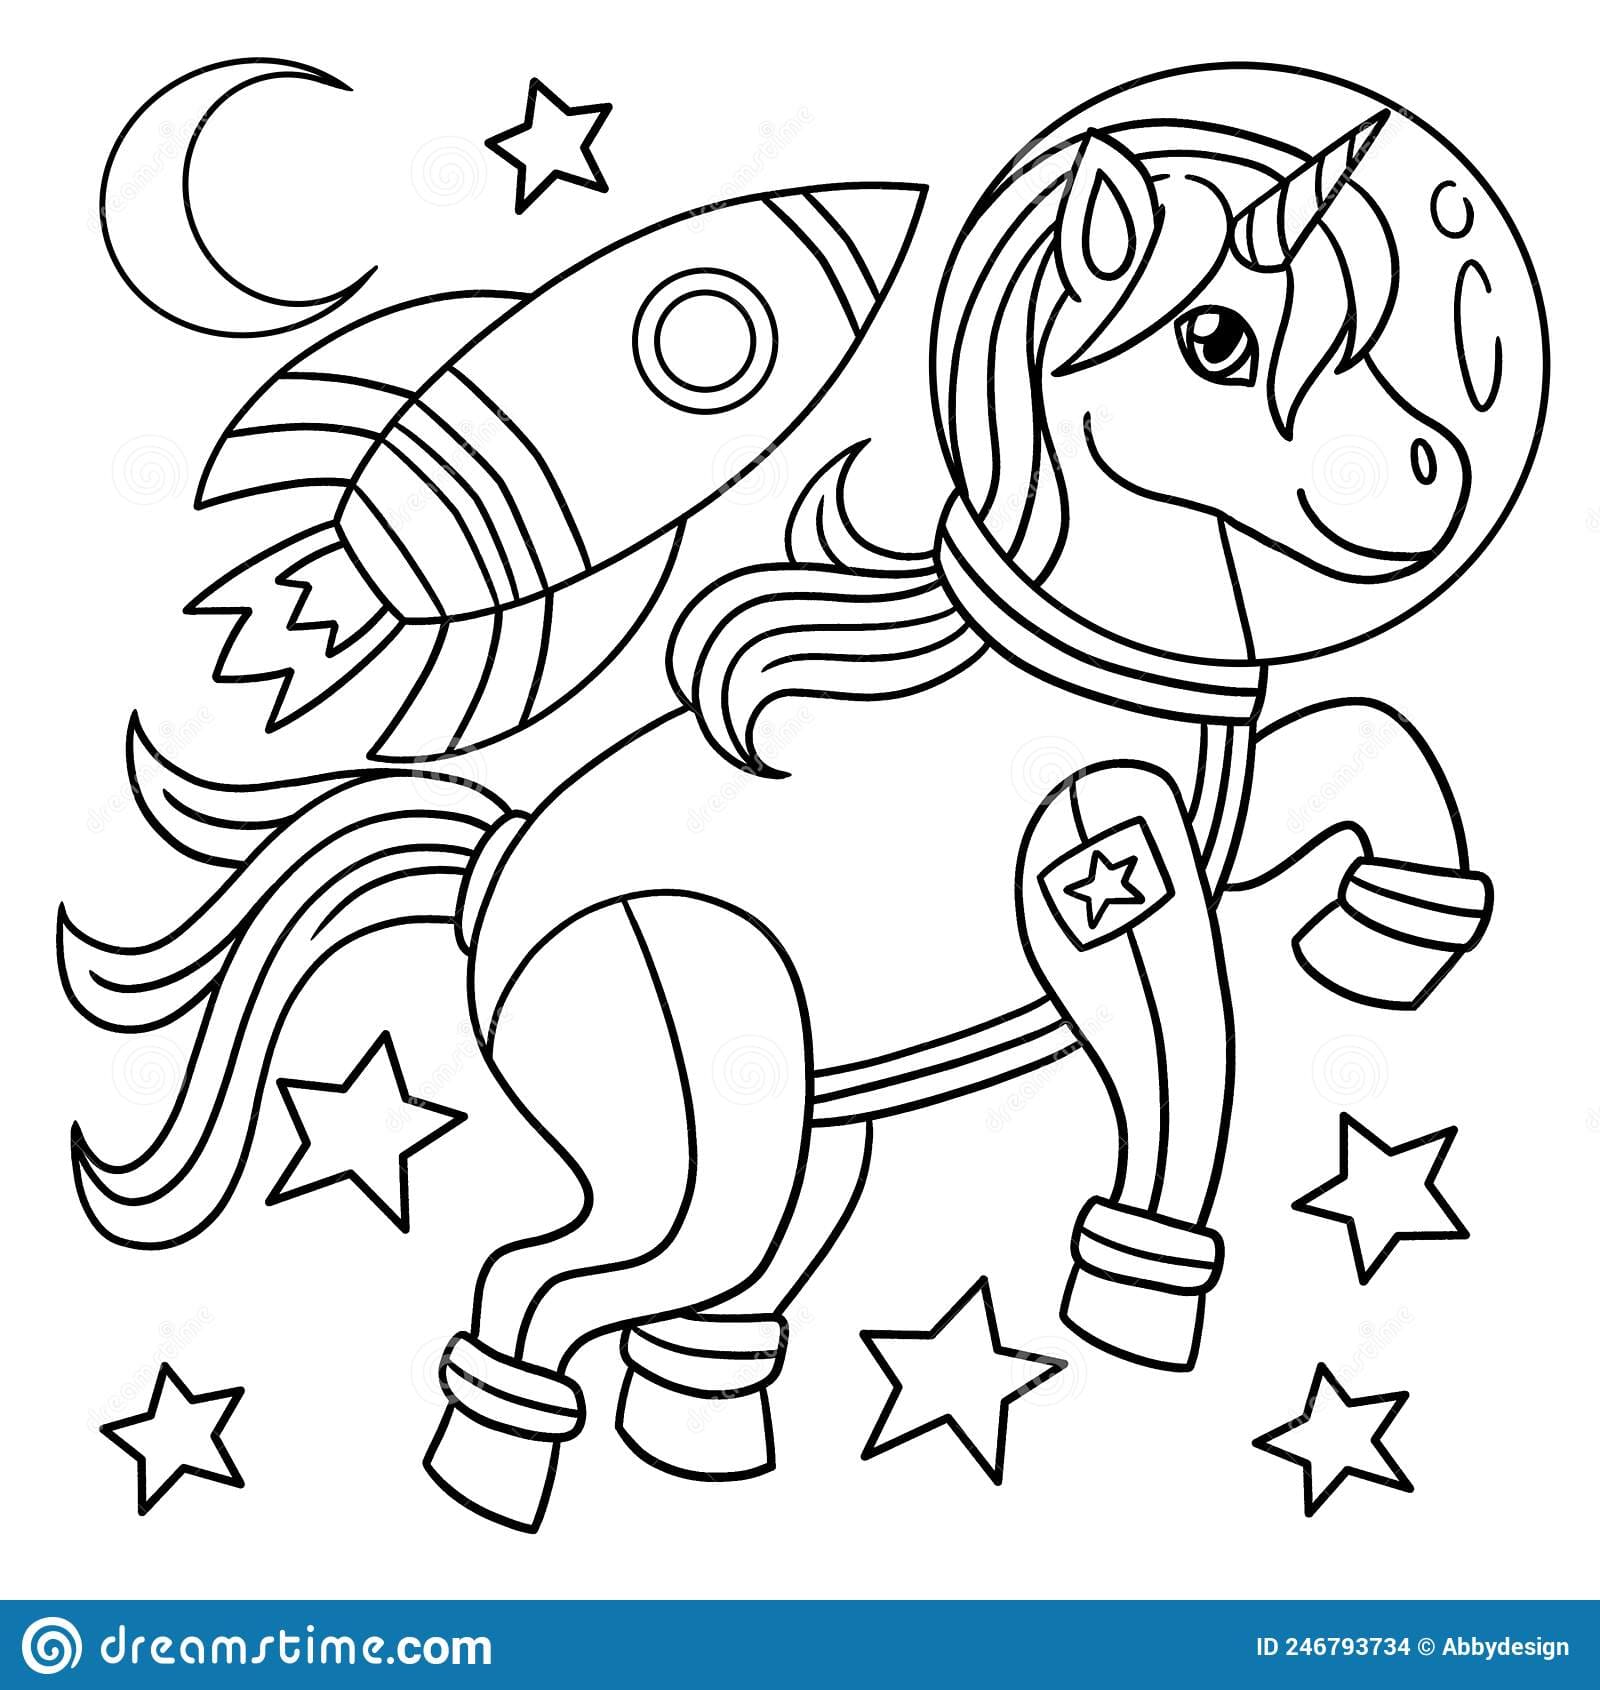 Unicorn Astronaut In Space Coloring Page for Kids